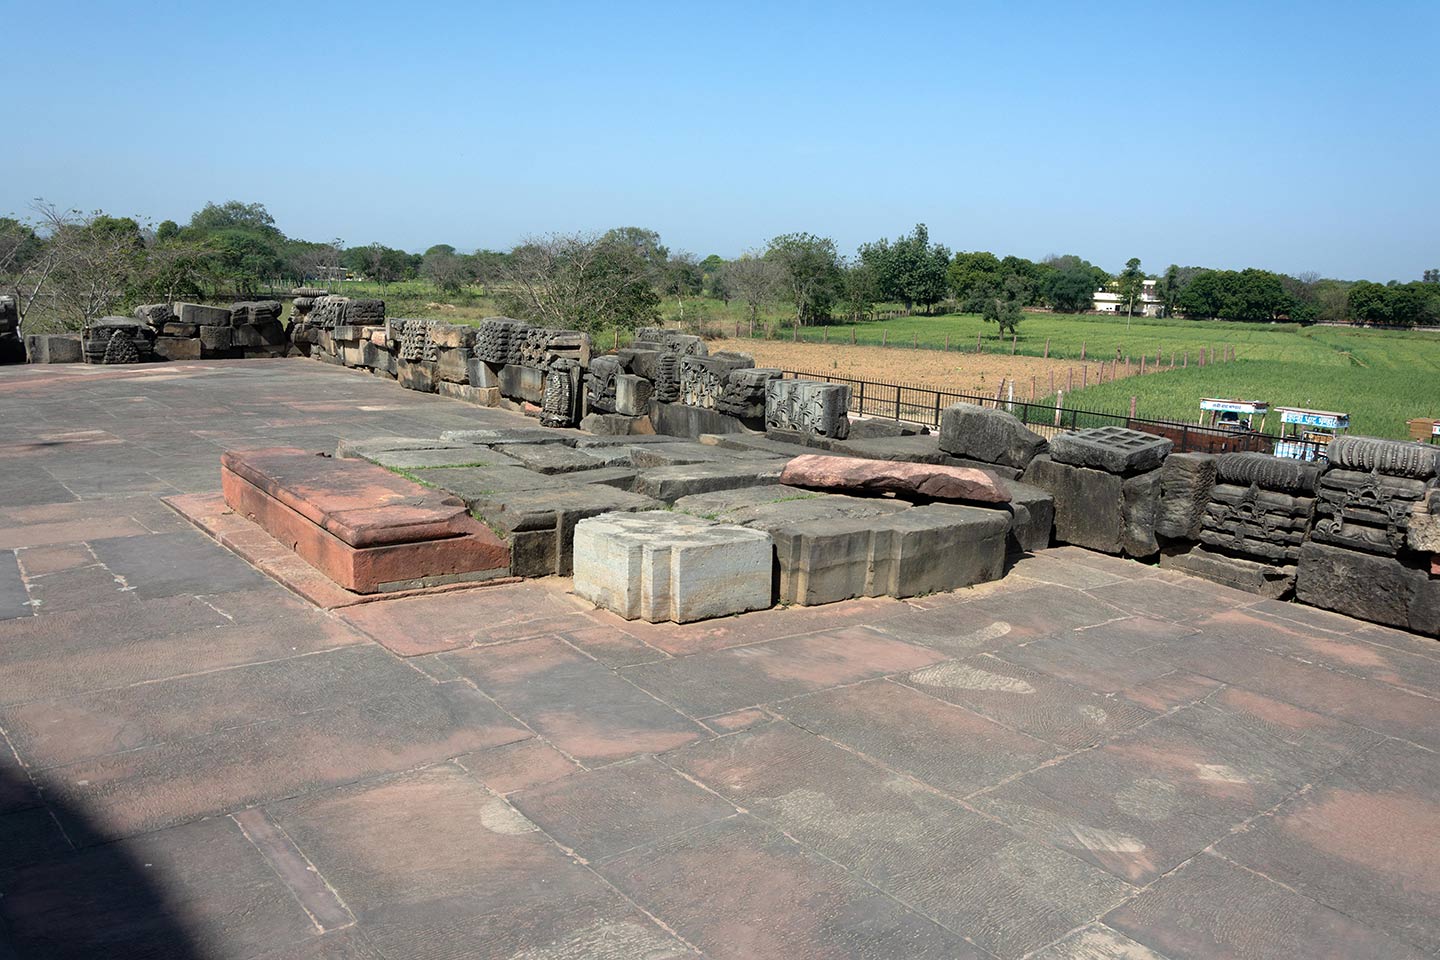 Broken fragments and debris from the original temple assembled on the north face of the adhisthana. The fragments assembled here were once part of the original temple, and other subsidiary structures of the Panchayatana plan.